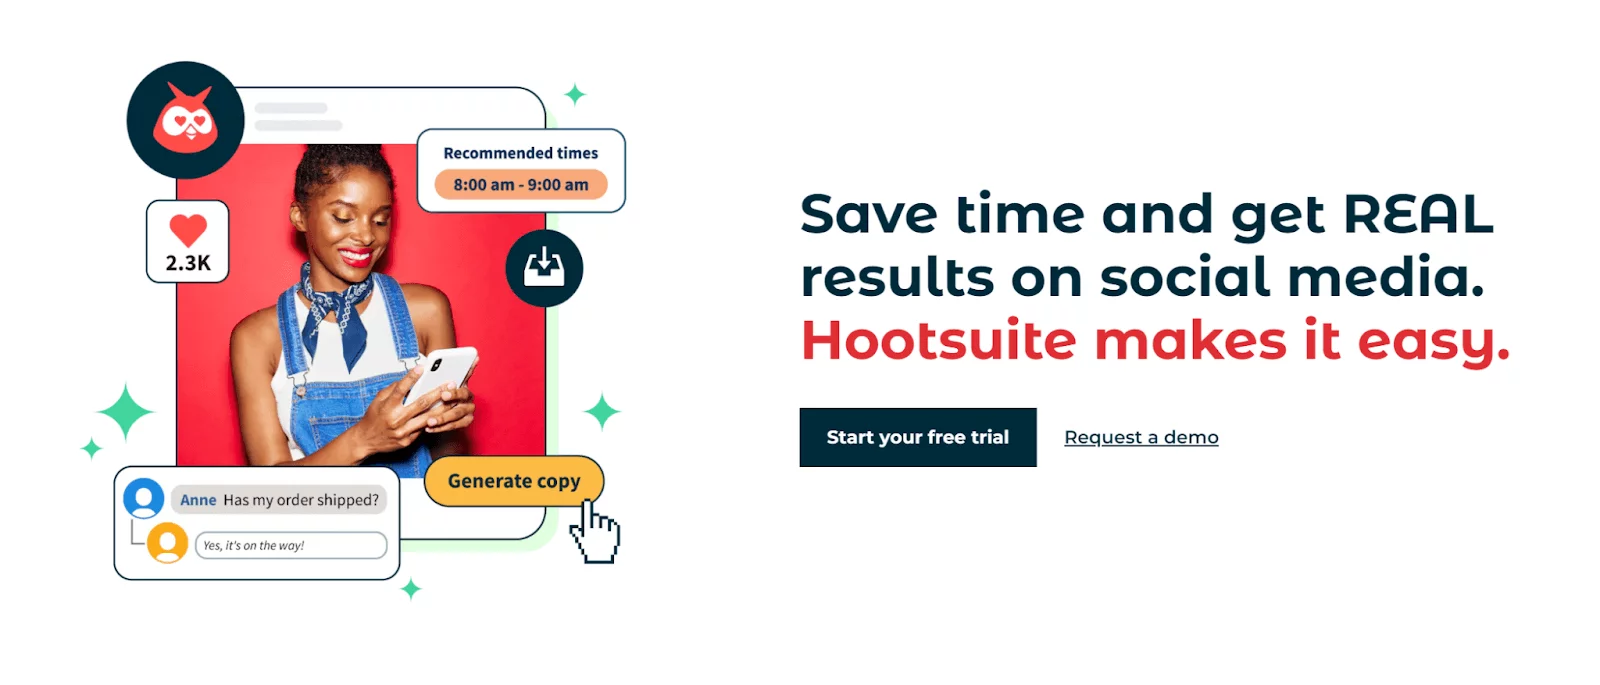 Home screen of Hootsuite's platform, illustrating its user interface and features for managing social media accounts.